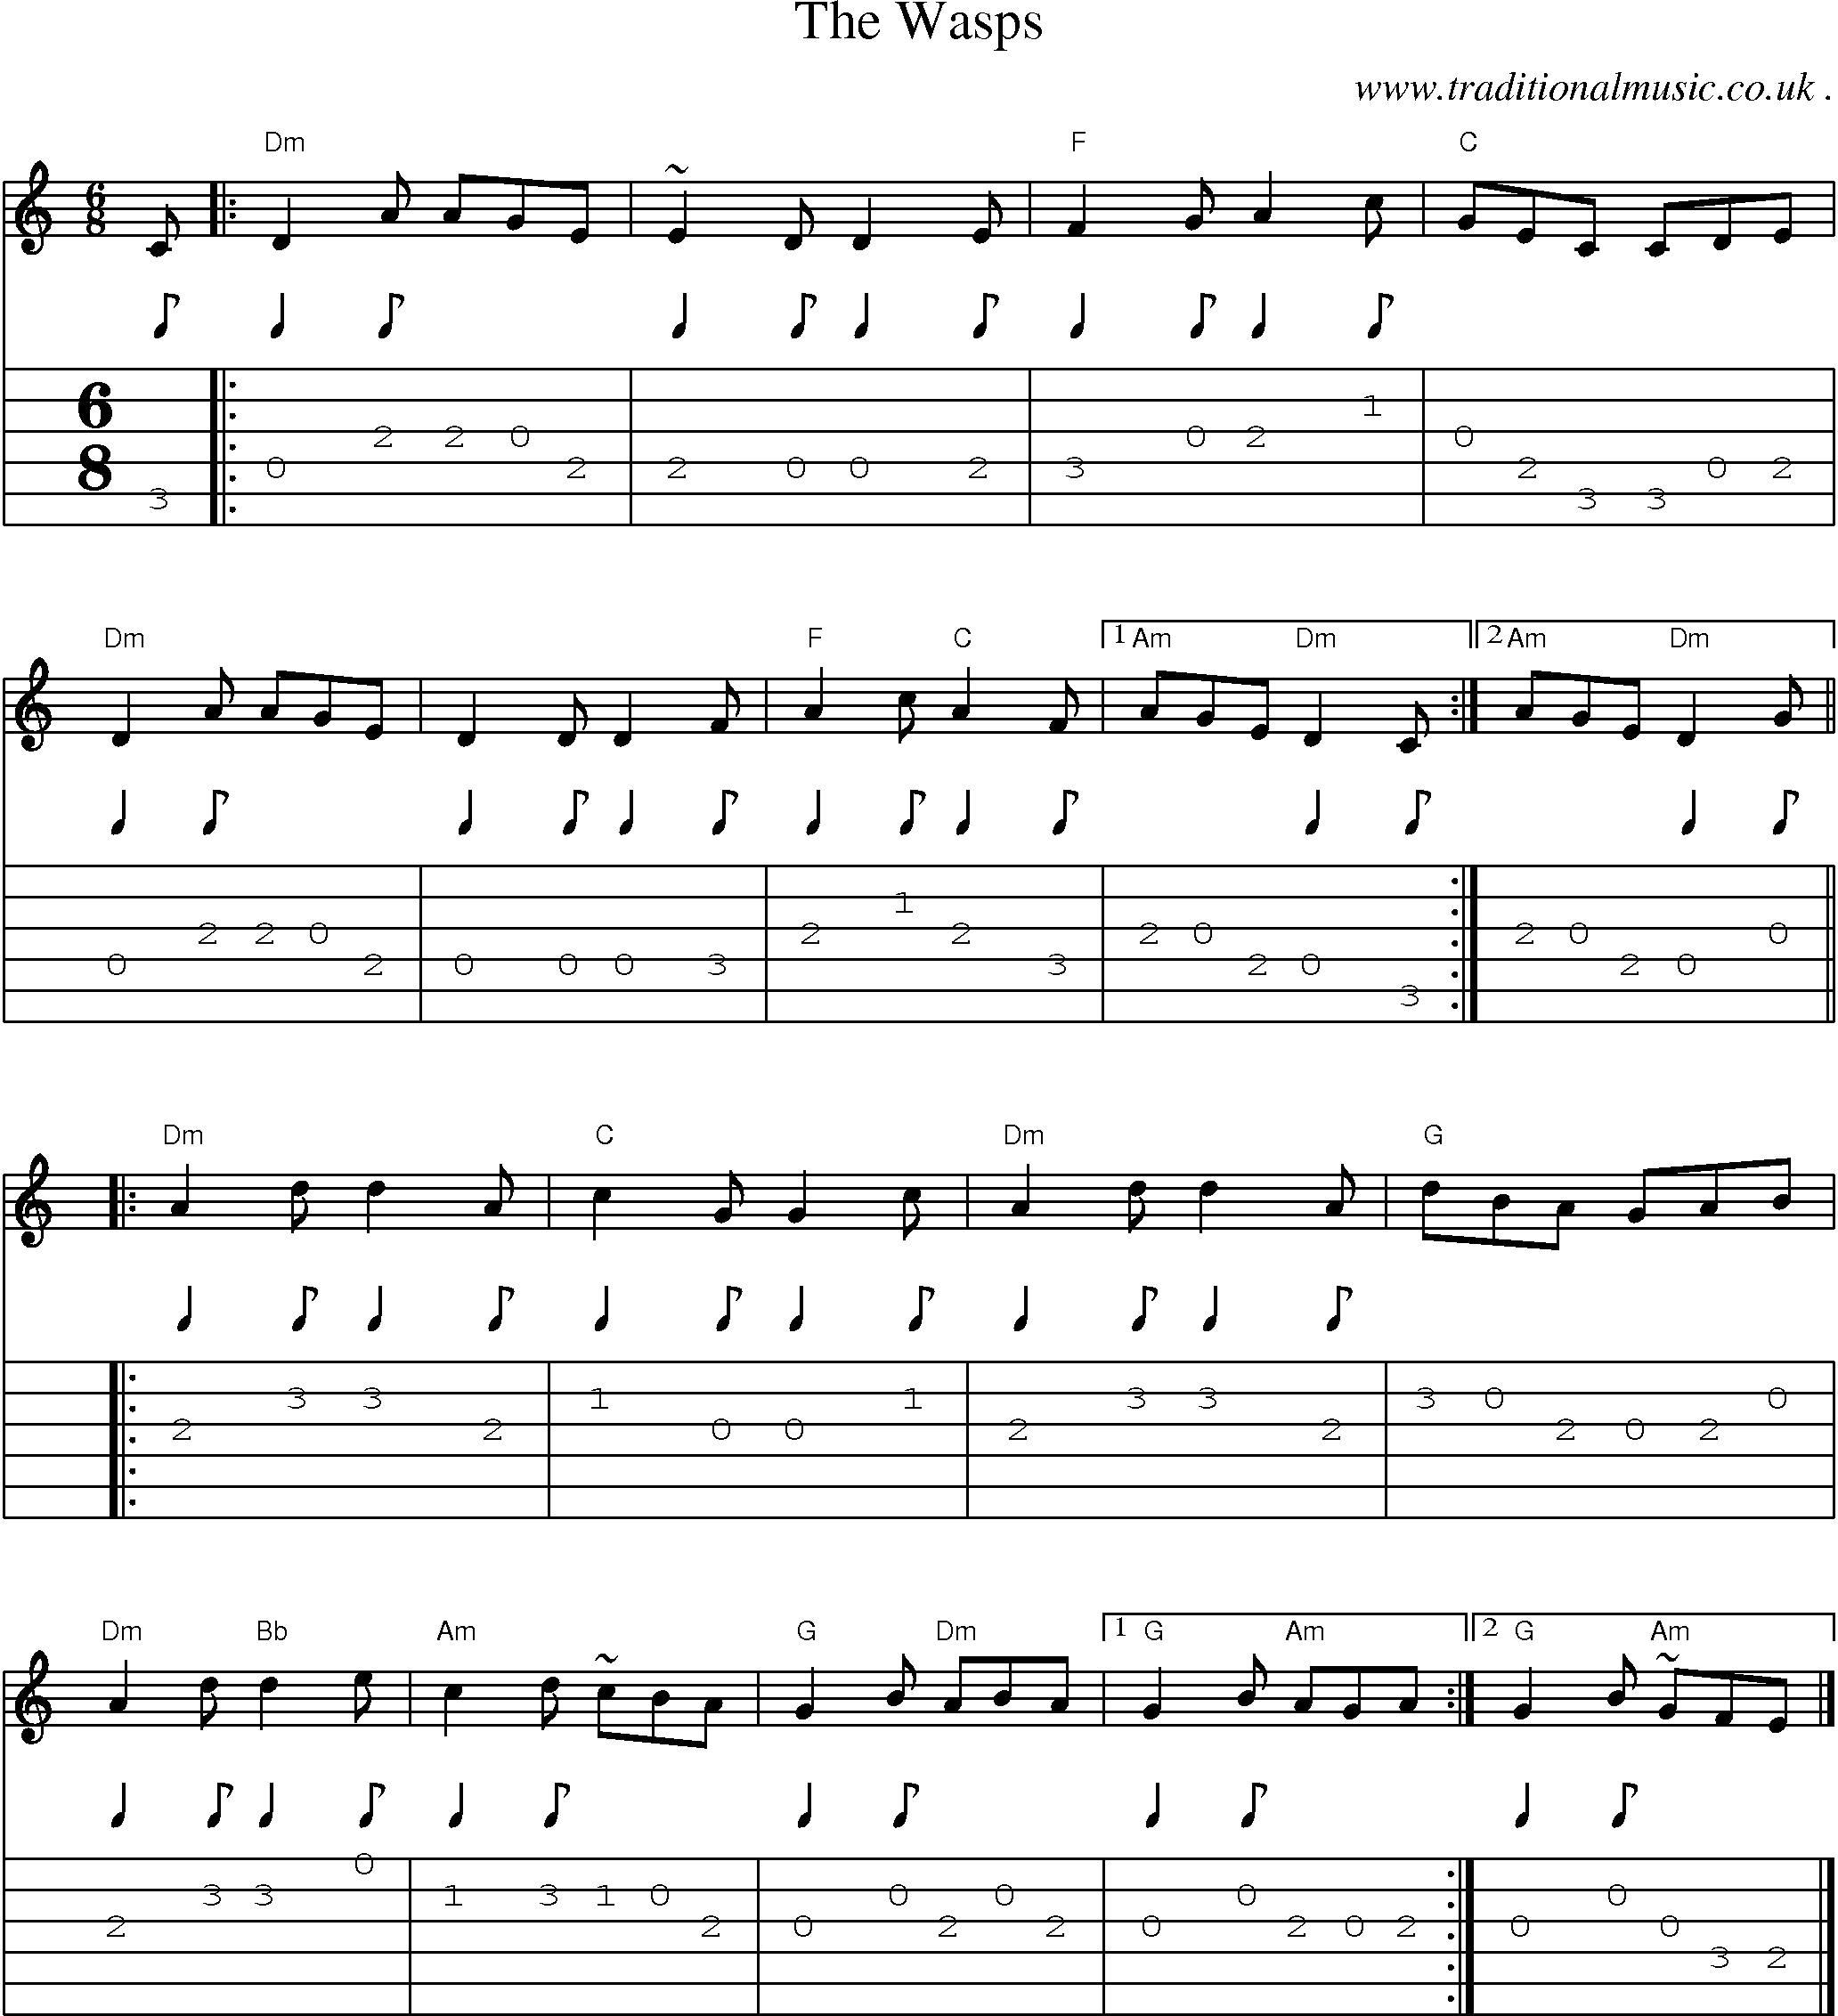 Music Score and Guitar Tabs for The Wasps